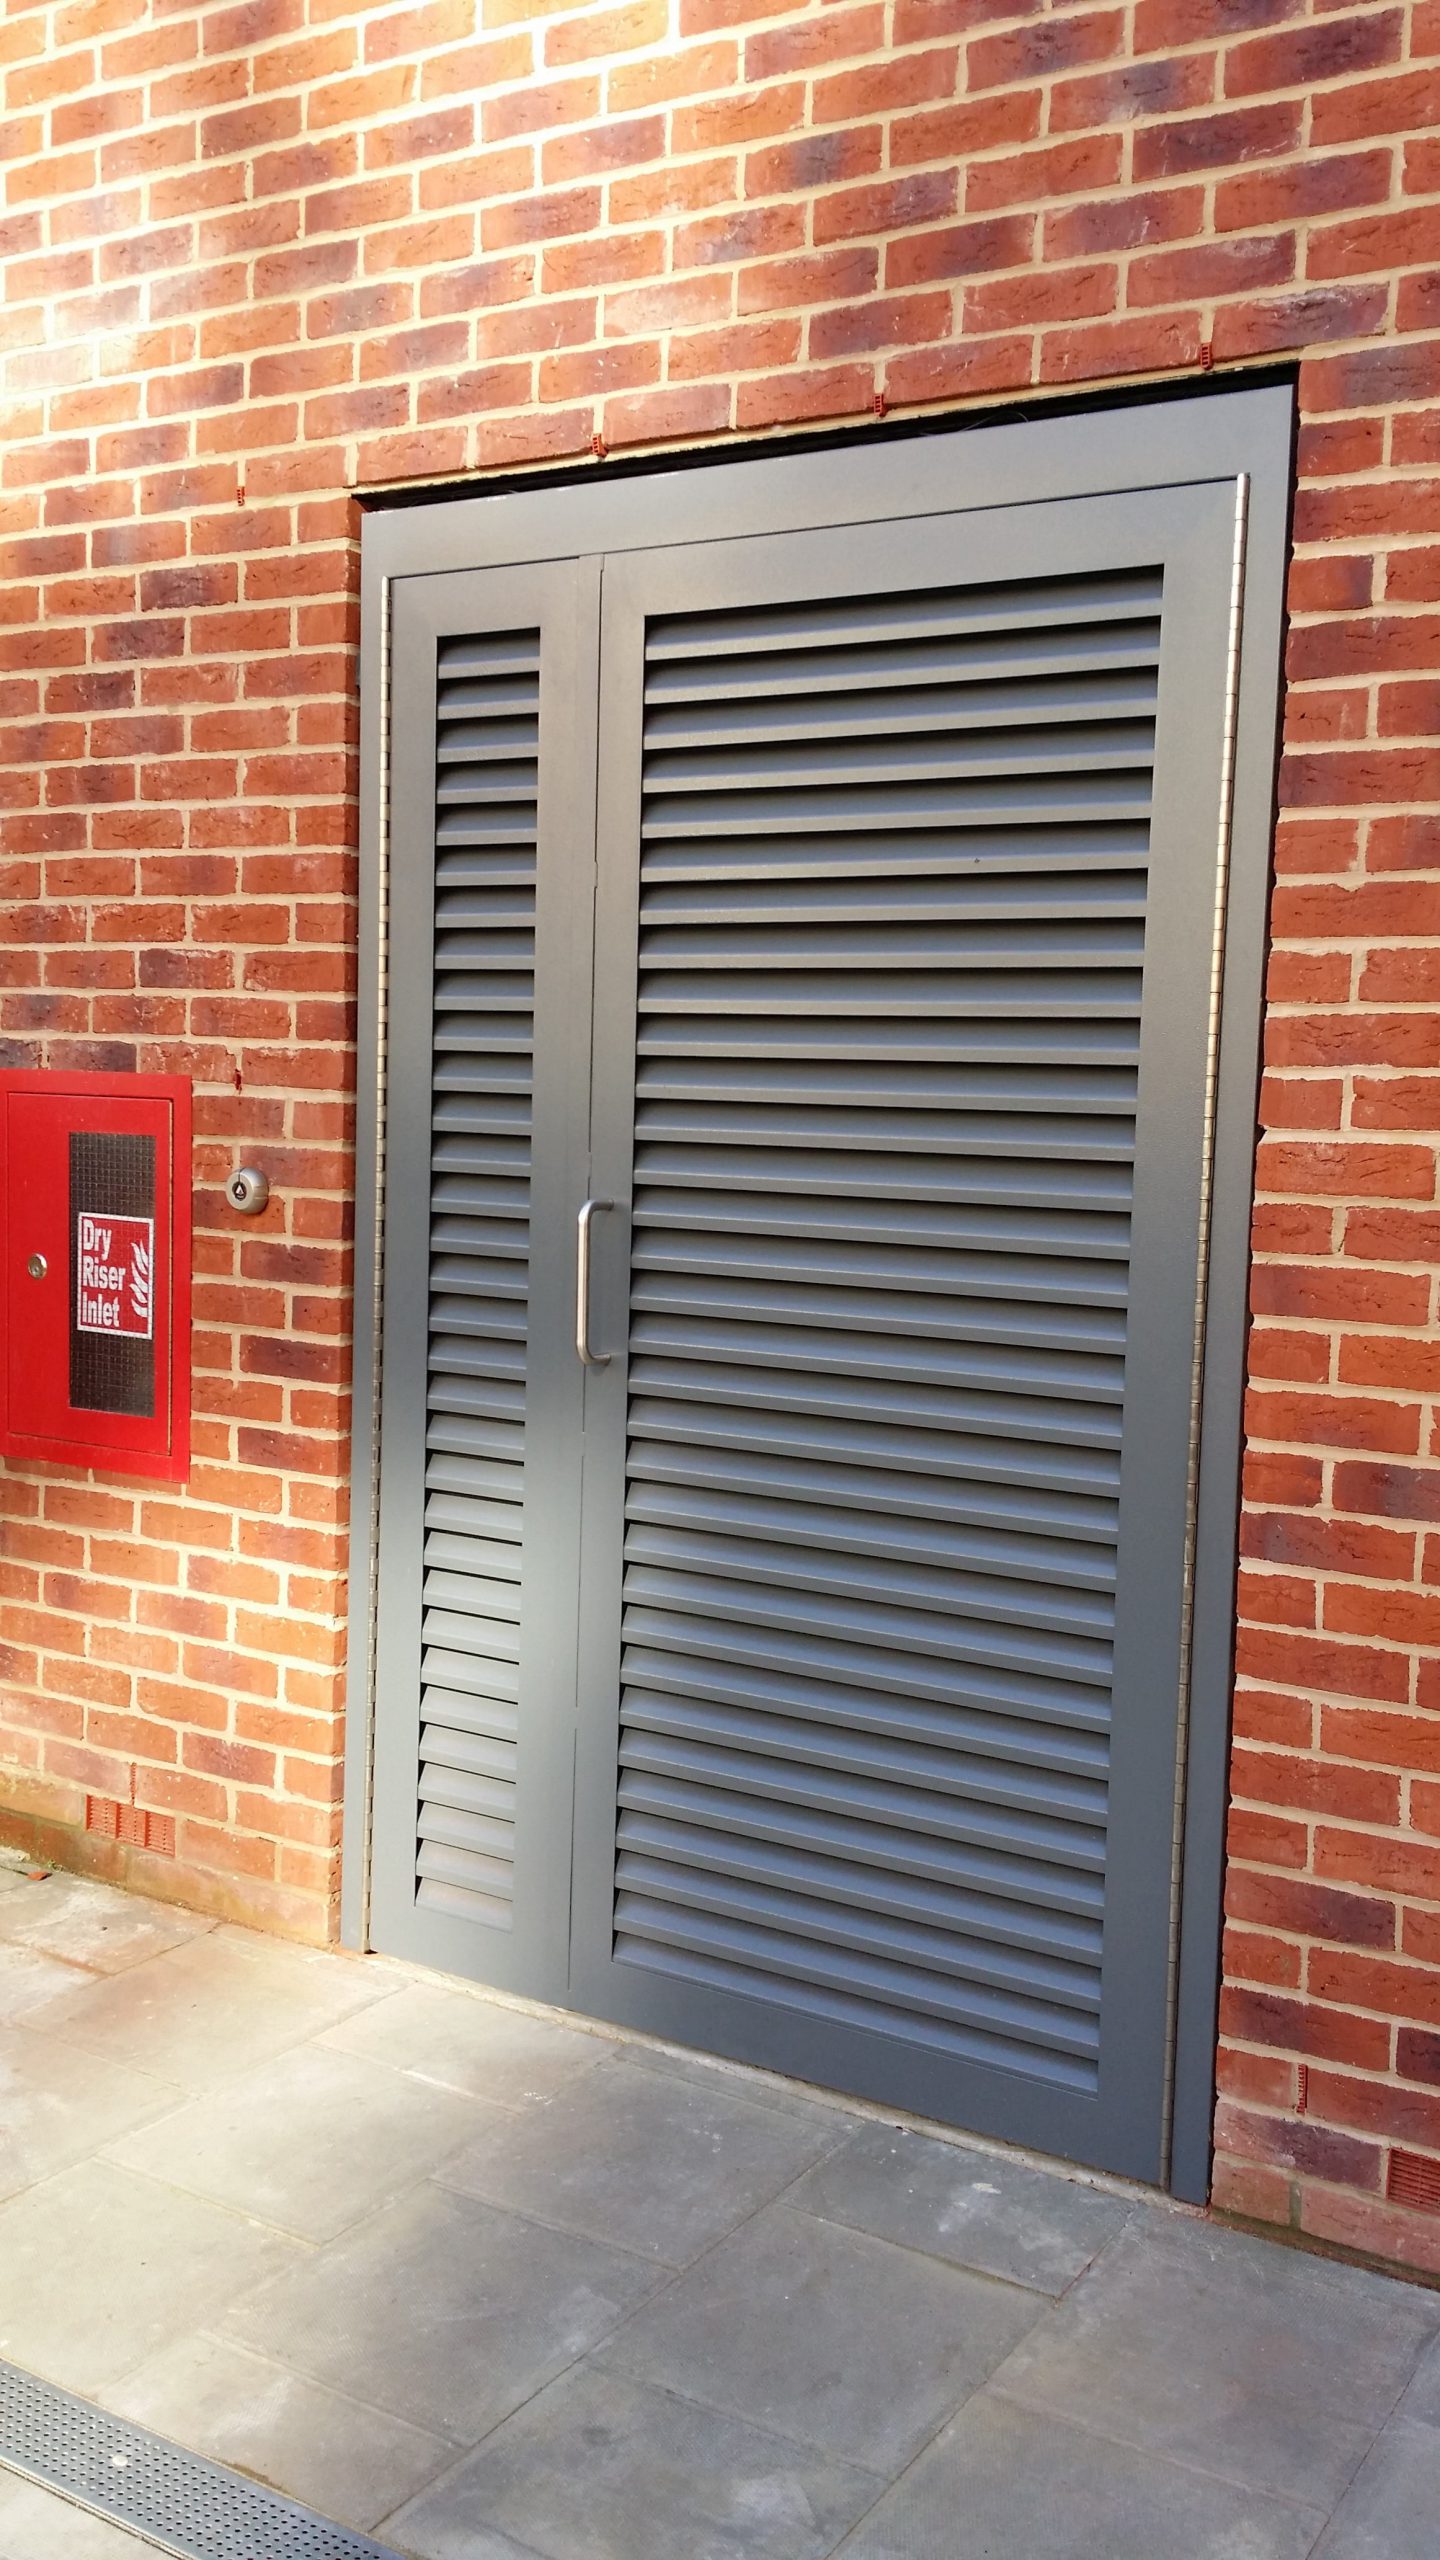 INDUSTRIAL STEEL LOUVERED DOORS FABRICATED TO LPS1173 SR2 AND PAS24 STANDARD. PRODUCED AND INSTALLED BY PREMIER SECURITY CONSULTANTS LTD.